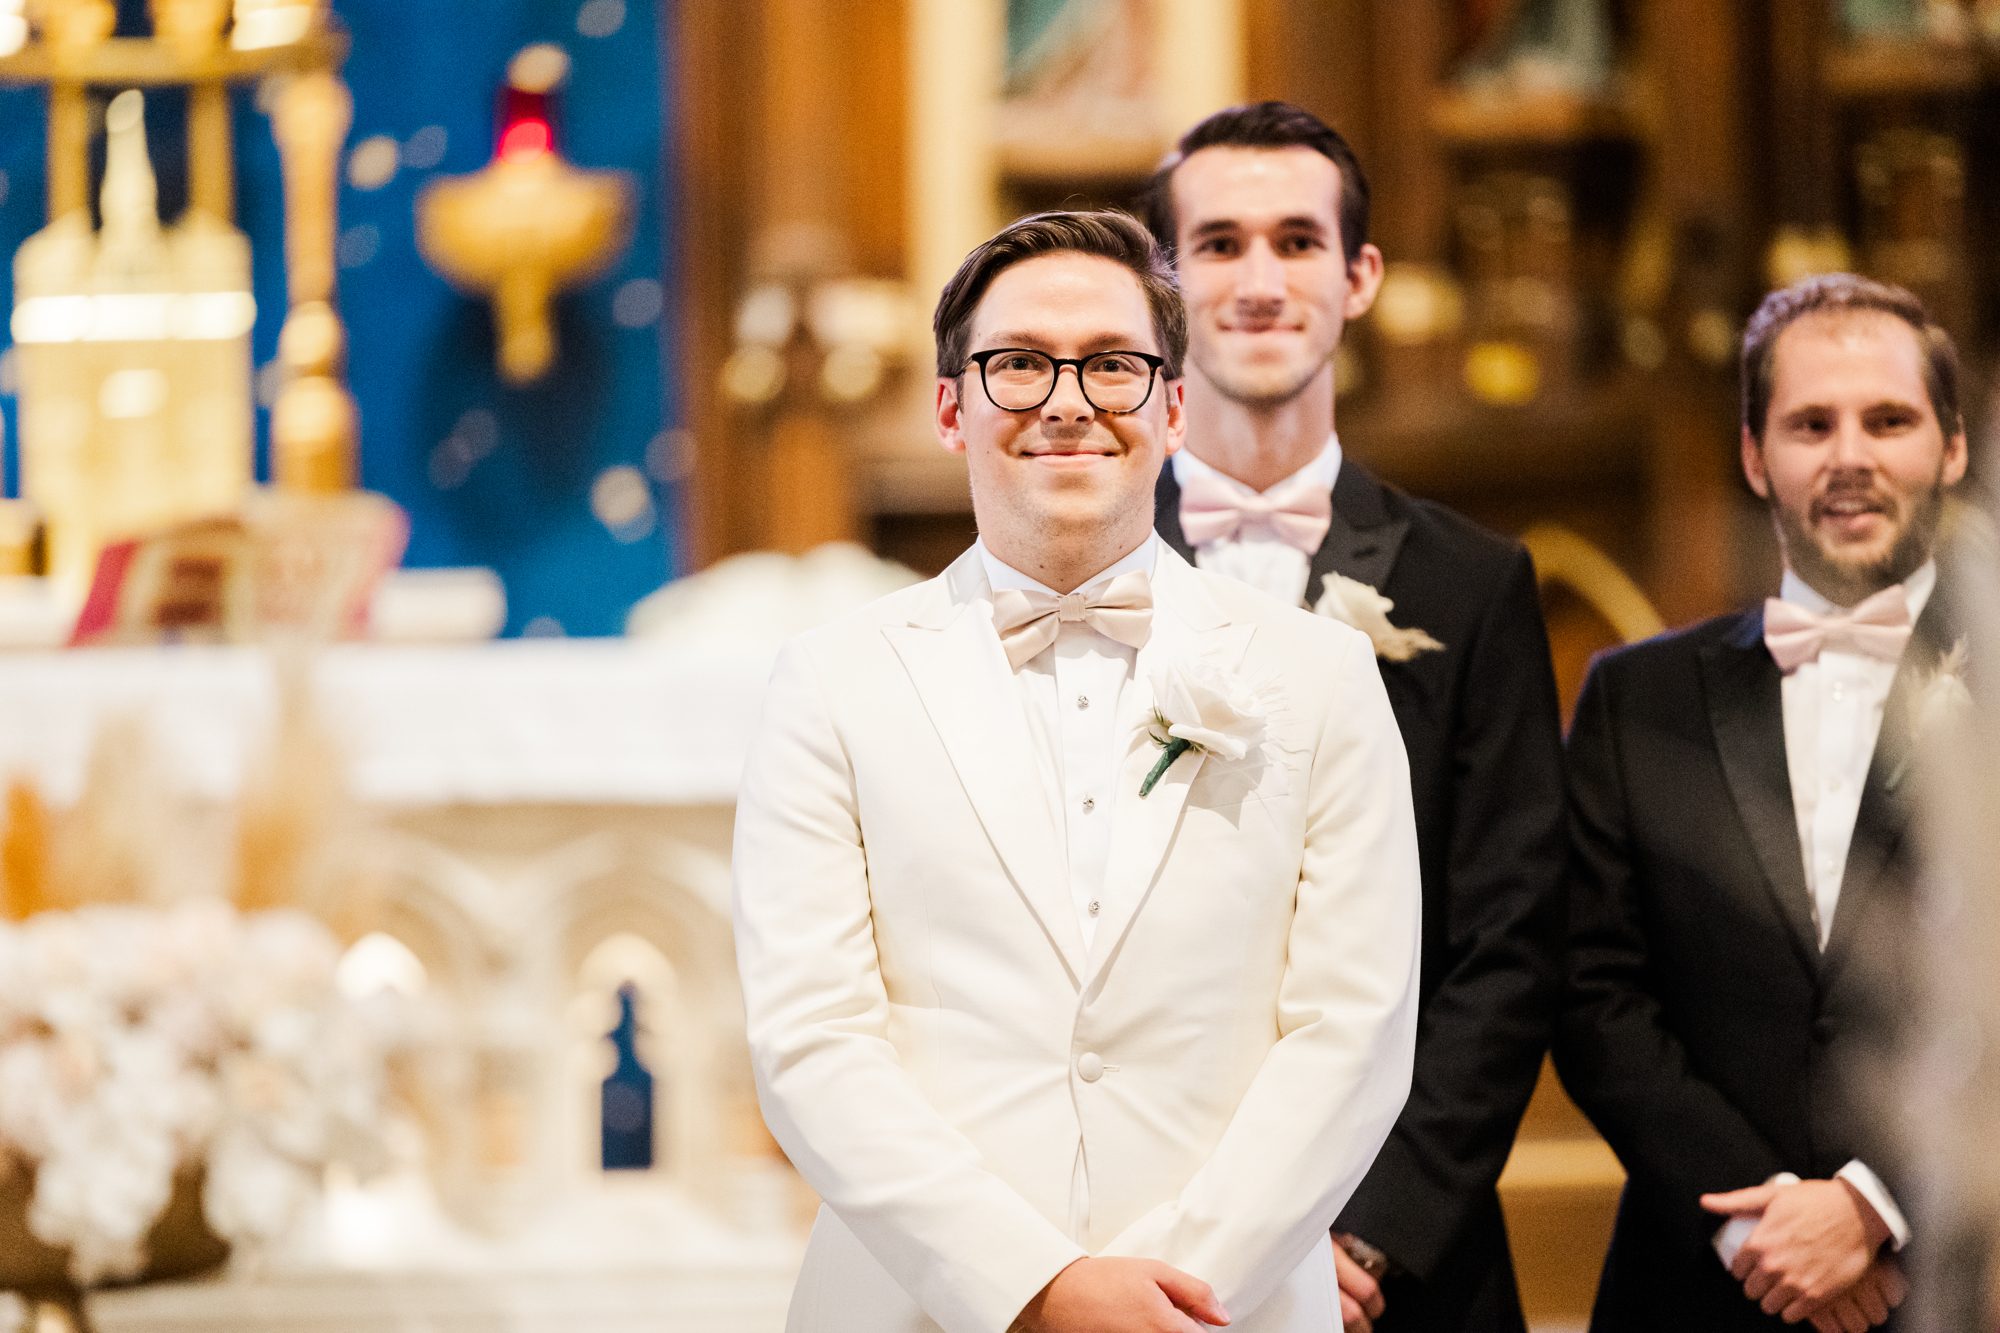 Special Old St. Patrick's Cathedral Ceremony and Houston Hall Reception Photos